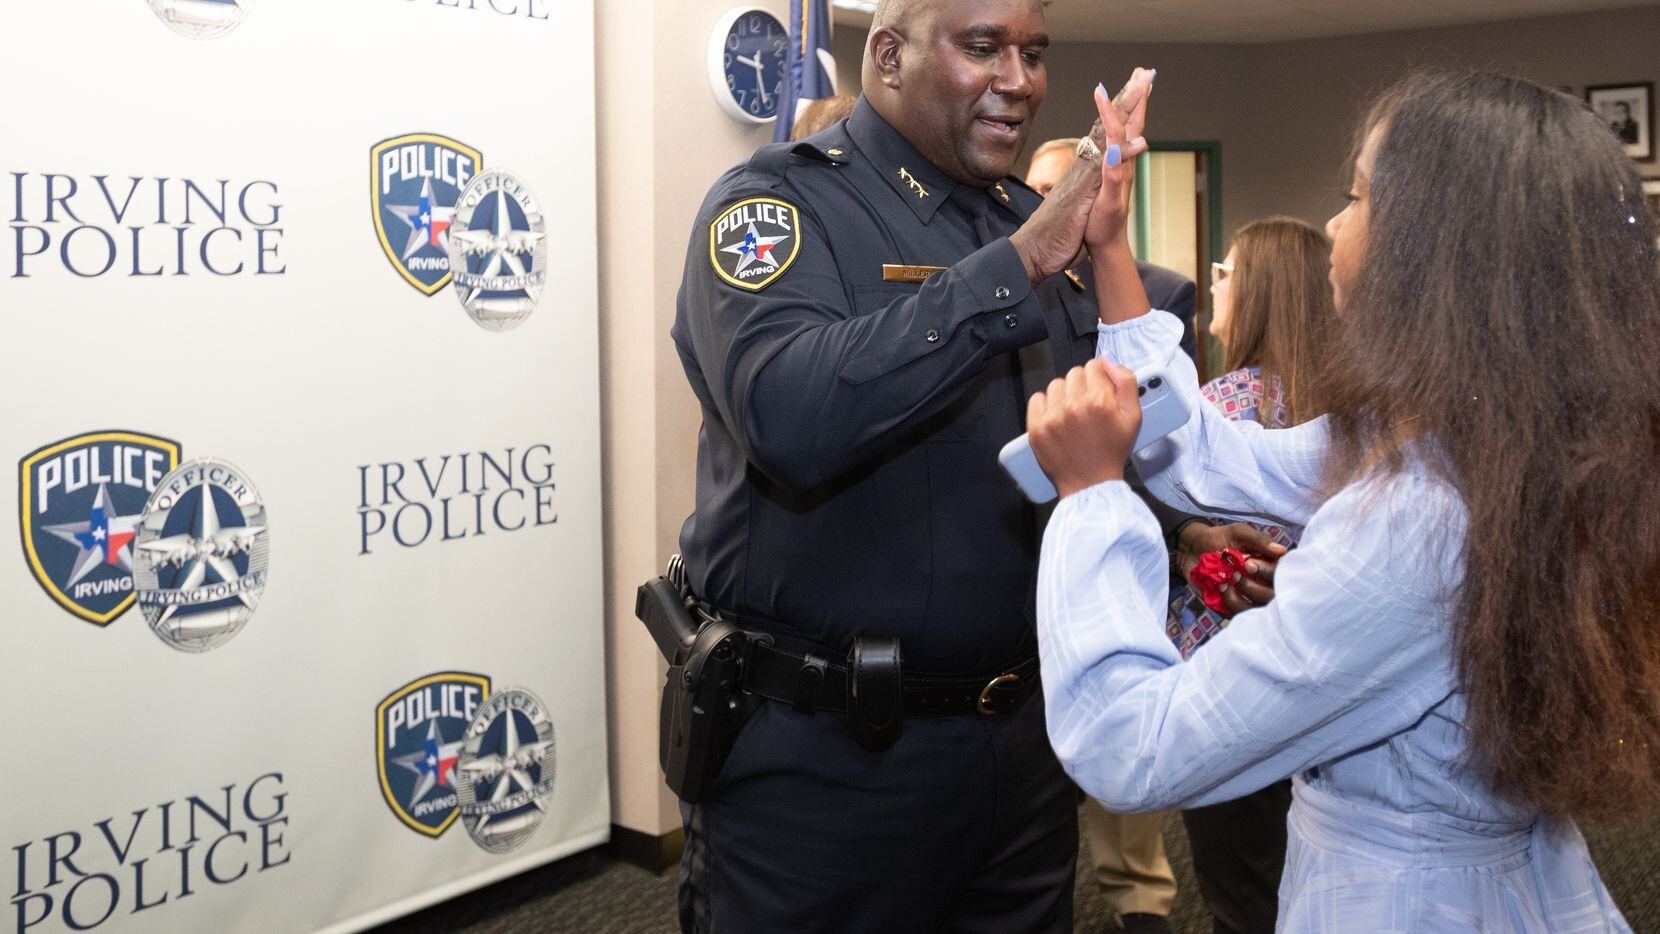 Irving police Chief Derick Miller high-fives his daughter Addison, 12, as she congratulates...